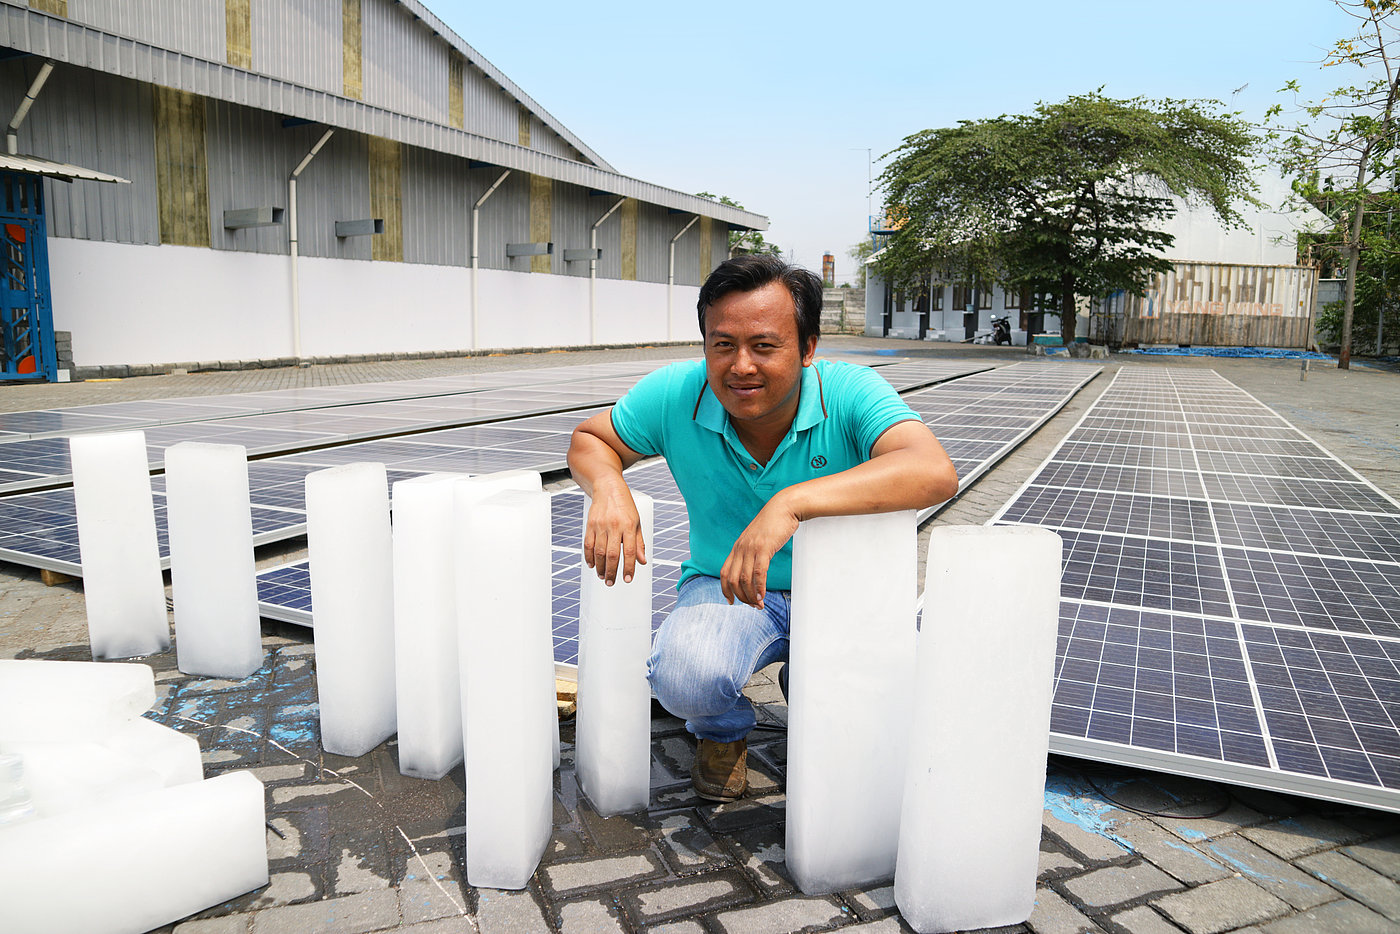 Photo: A courtyard with a large number of solar panels lying flat on the ground. A man is crouching next to them, leaning on small blocks of ice.